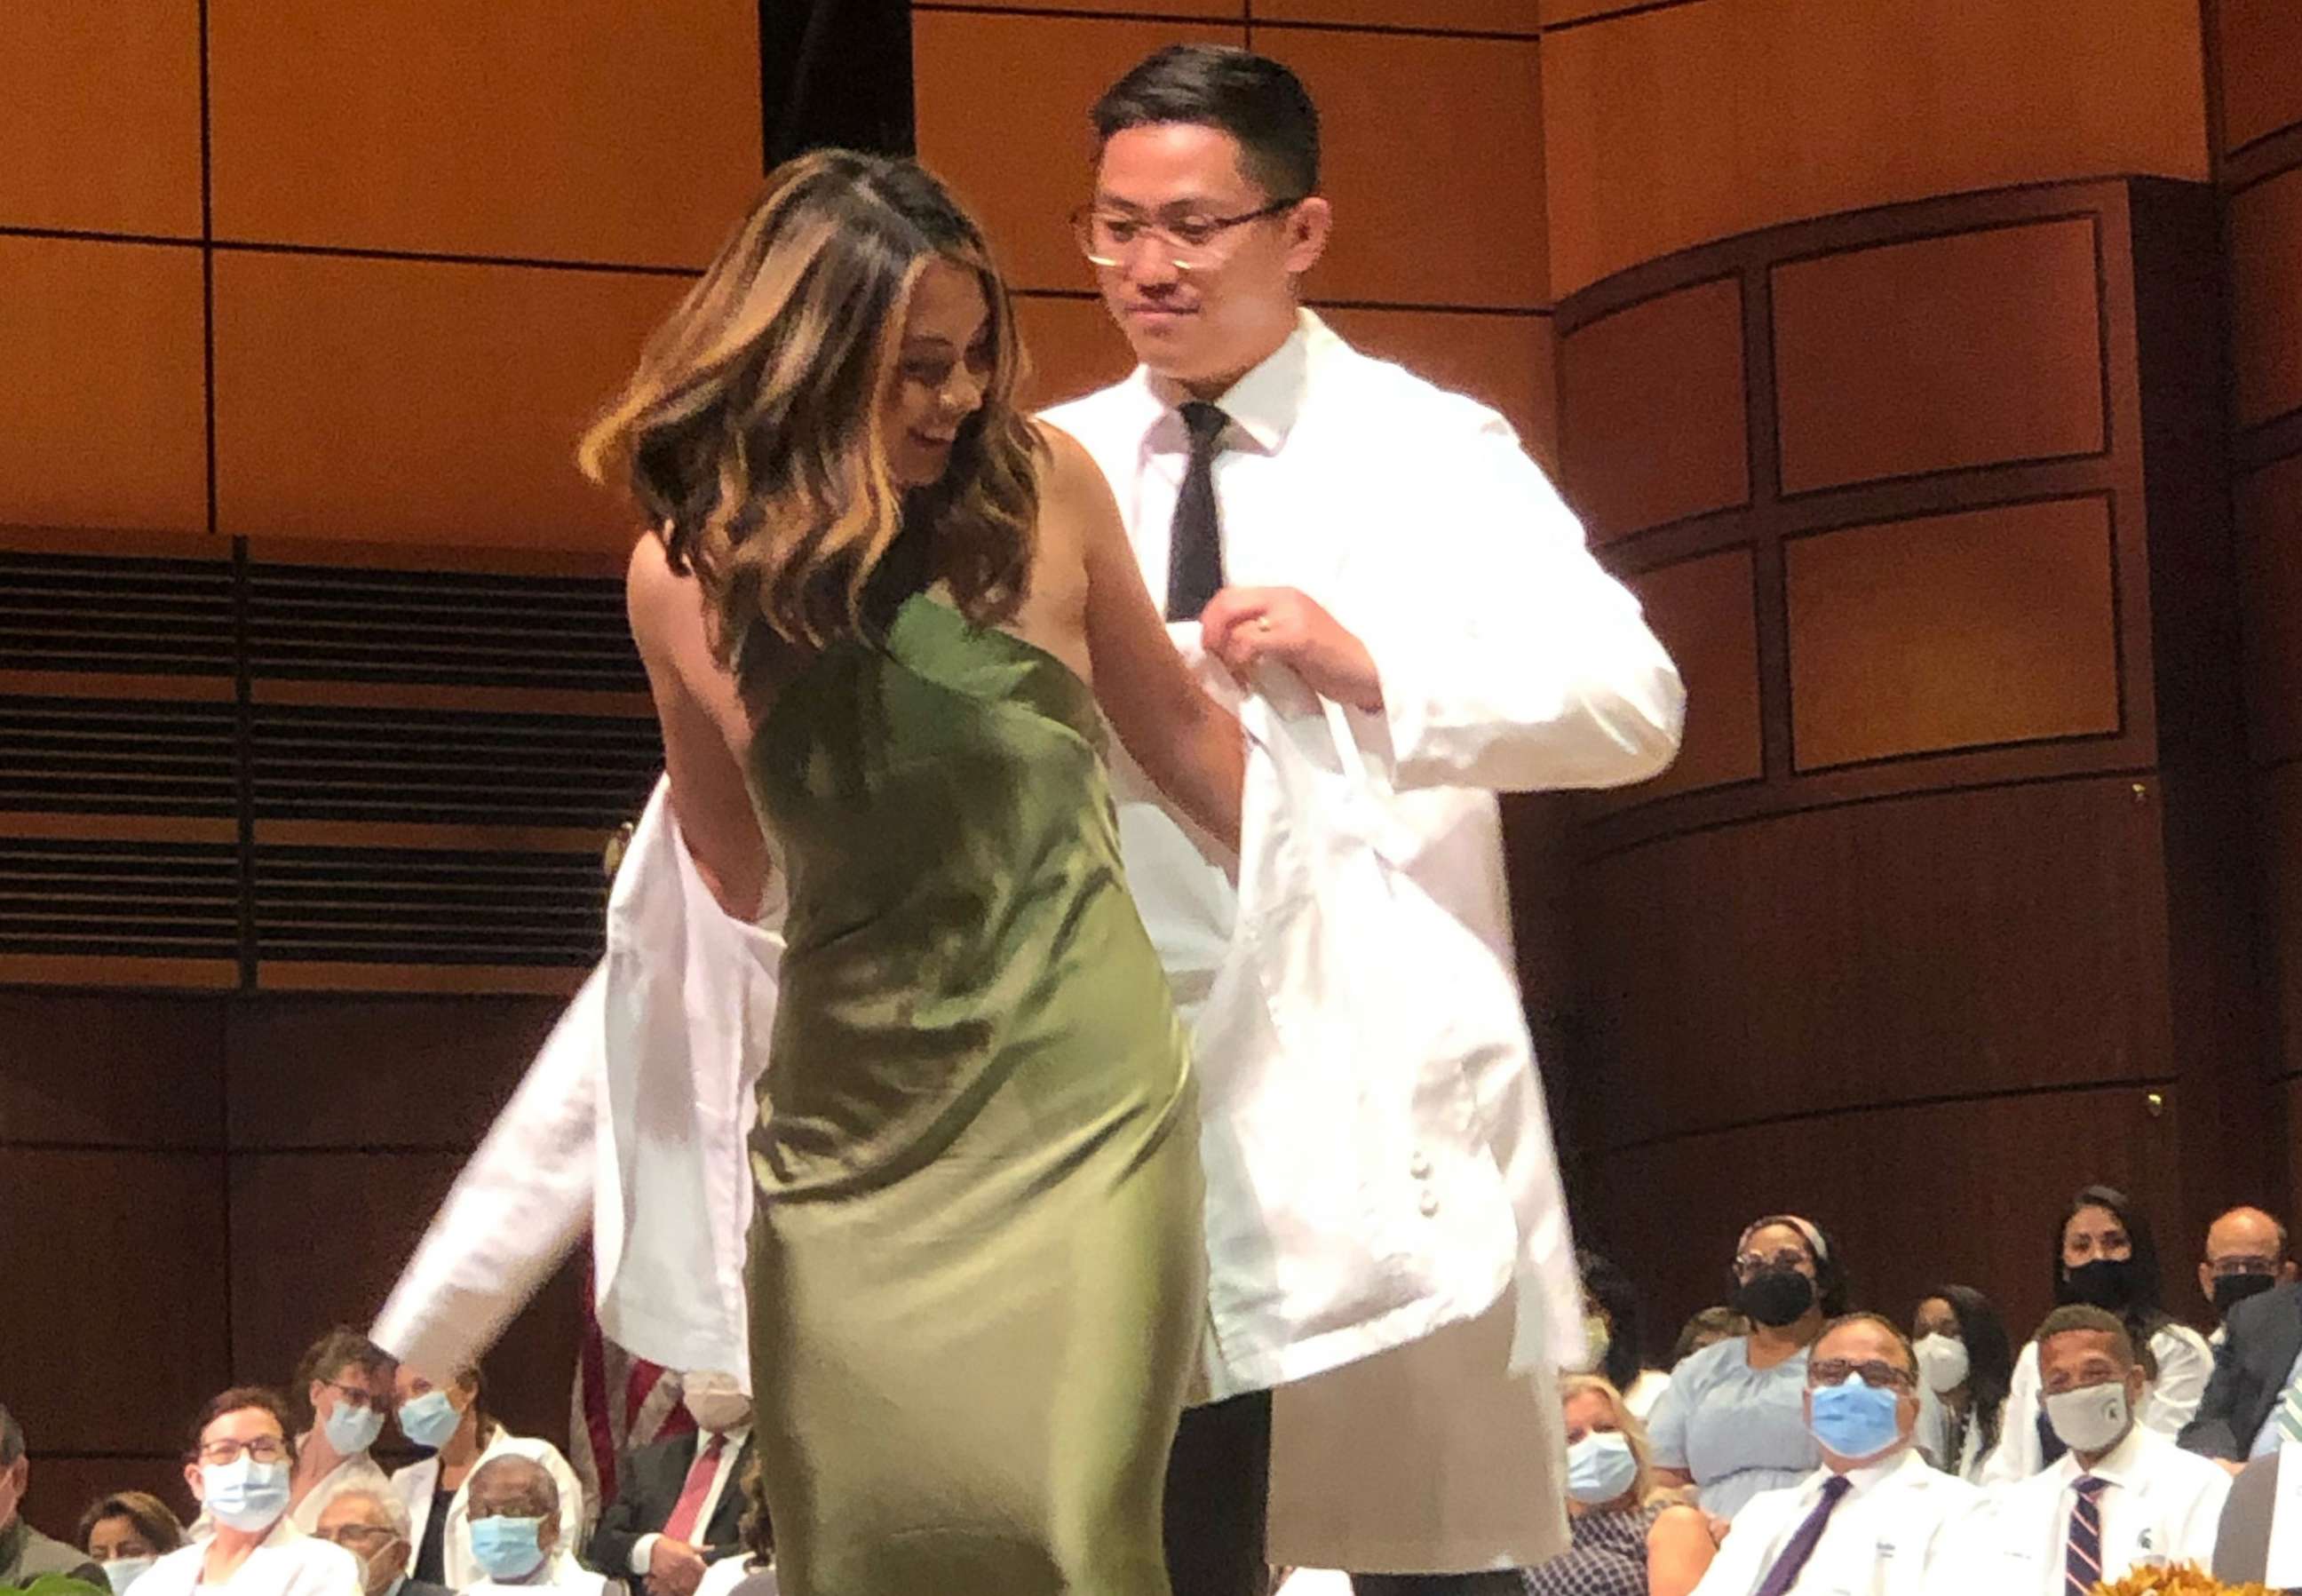 PHOTO: Maria Cielito Robles, a medical school student, chose her older brother, Carlito Robles, to give her her white coat. The white coat ceremony for medical school students marks the beginning of the journey to becoming doctors.